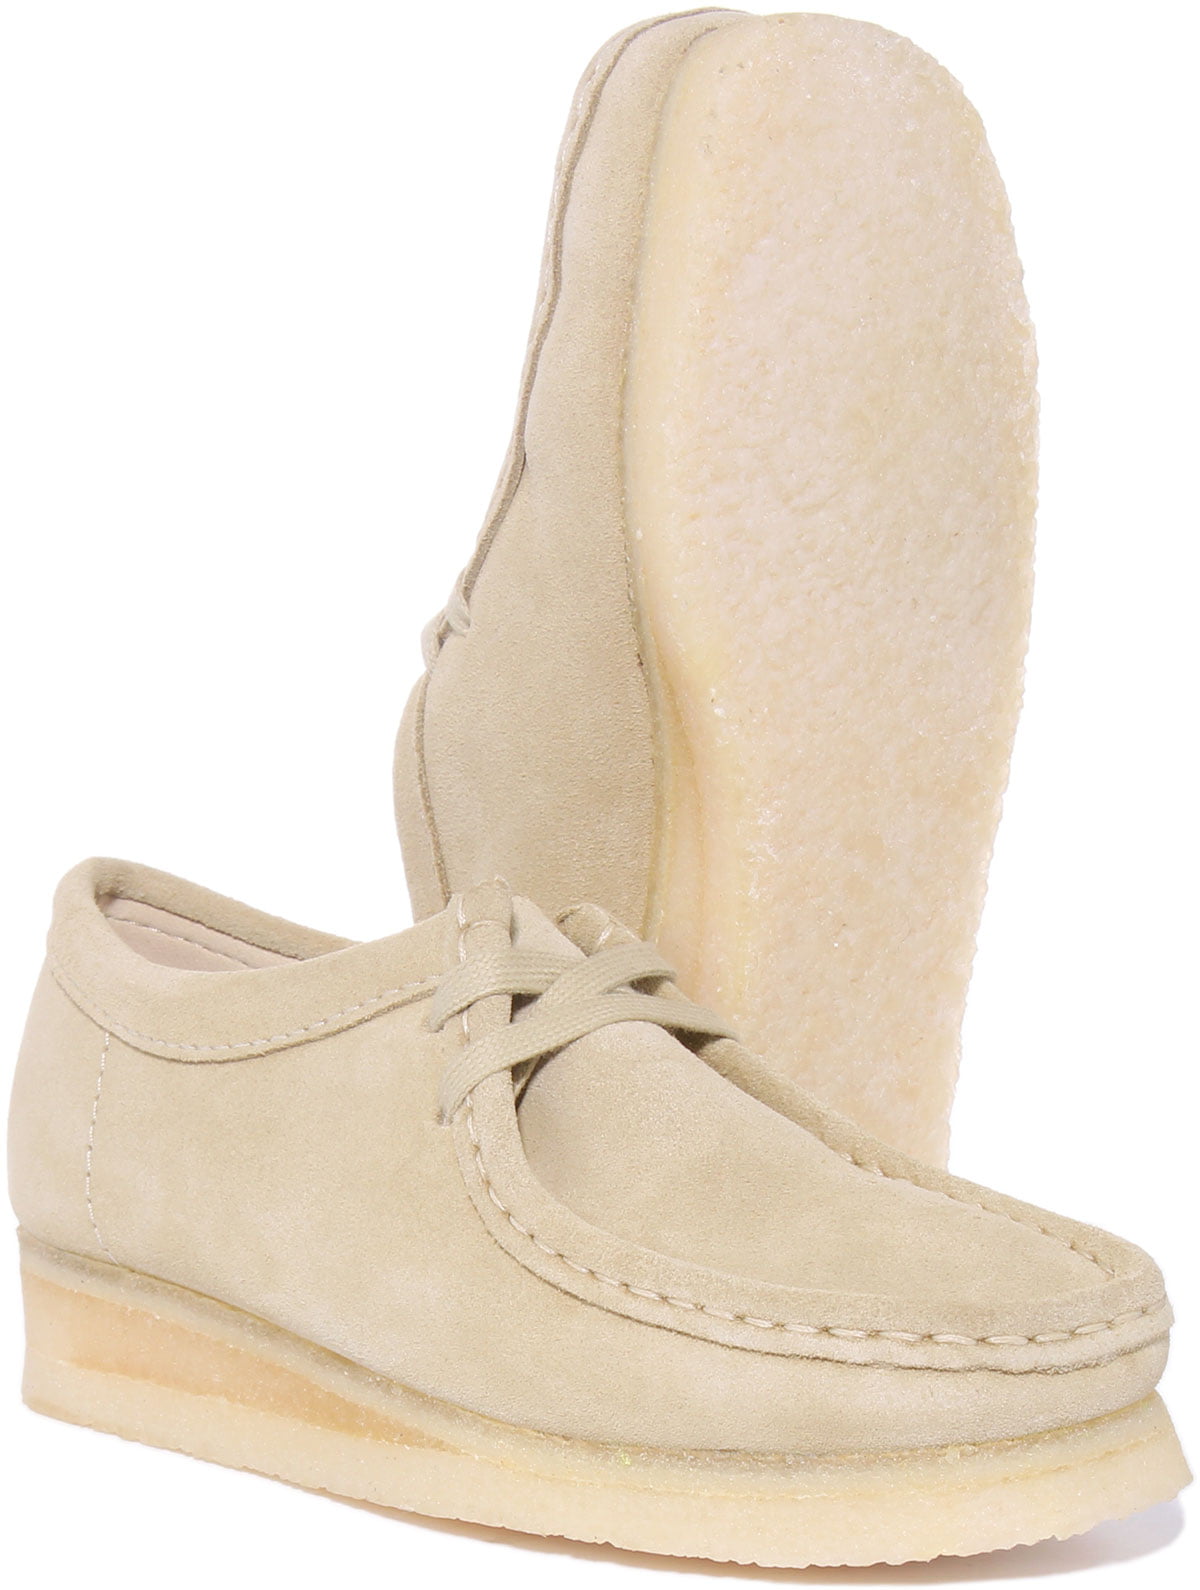 Clarks Originals Wallabee Women's Lace Up Suede Shoes In Beige Size 9.5